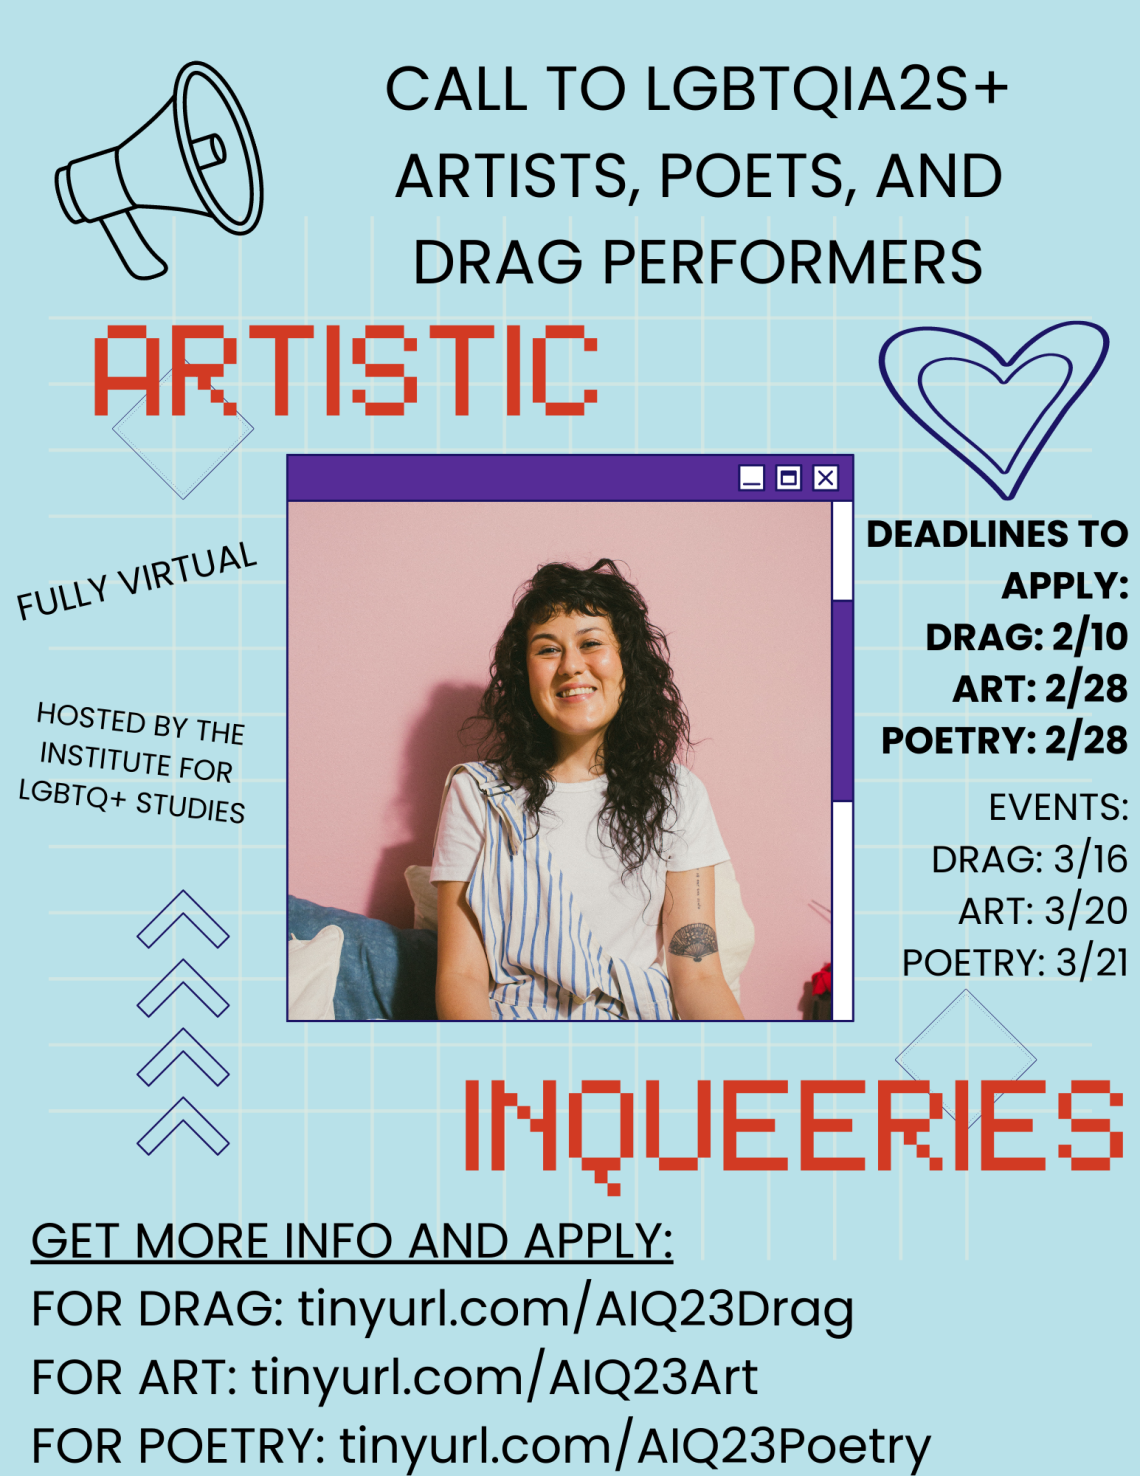 blue background with black and red text with photo of person smiling in the middle. Text reads "call to LGBTQIA2S+ artists, poets, and drag performers. Deadlines to apply: Drag: 2/10, Art 2/18, Poetry: 2/18